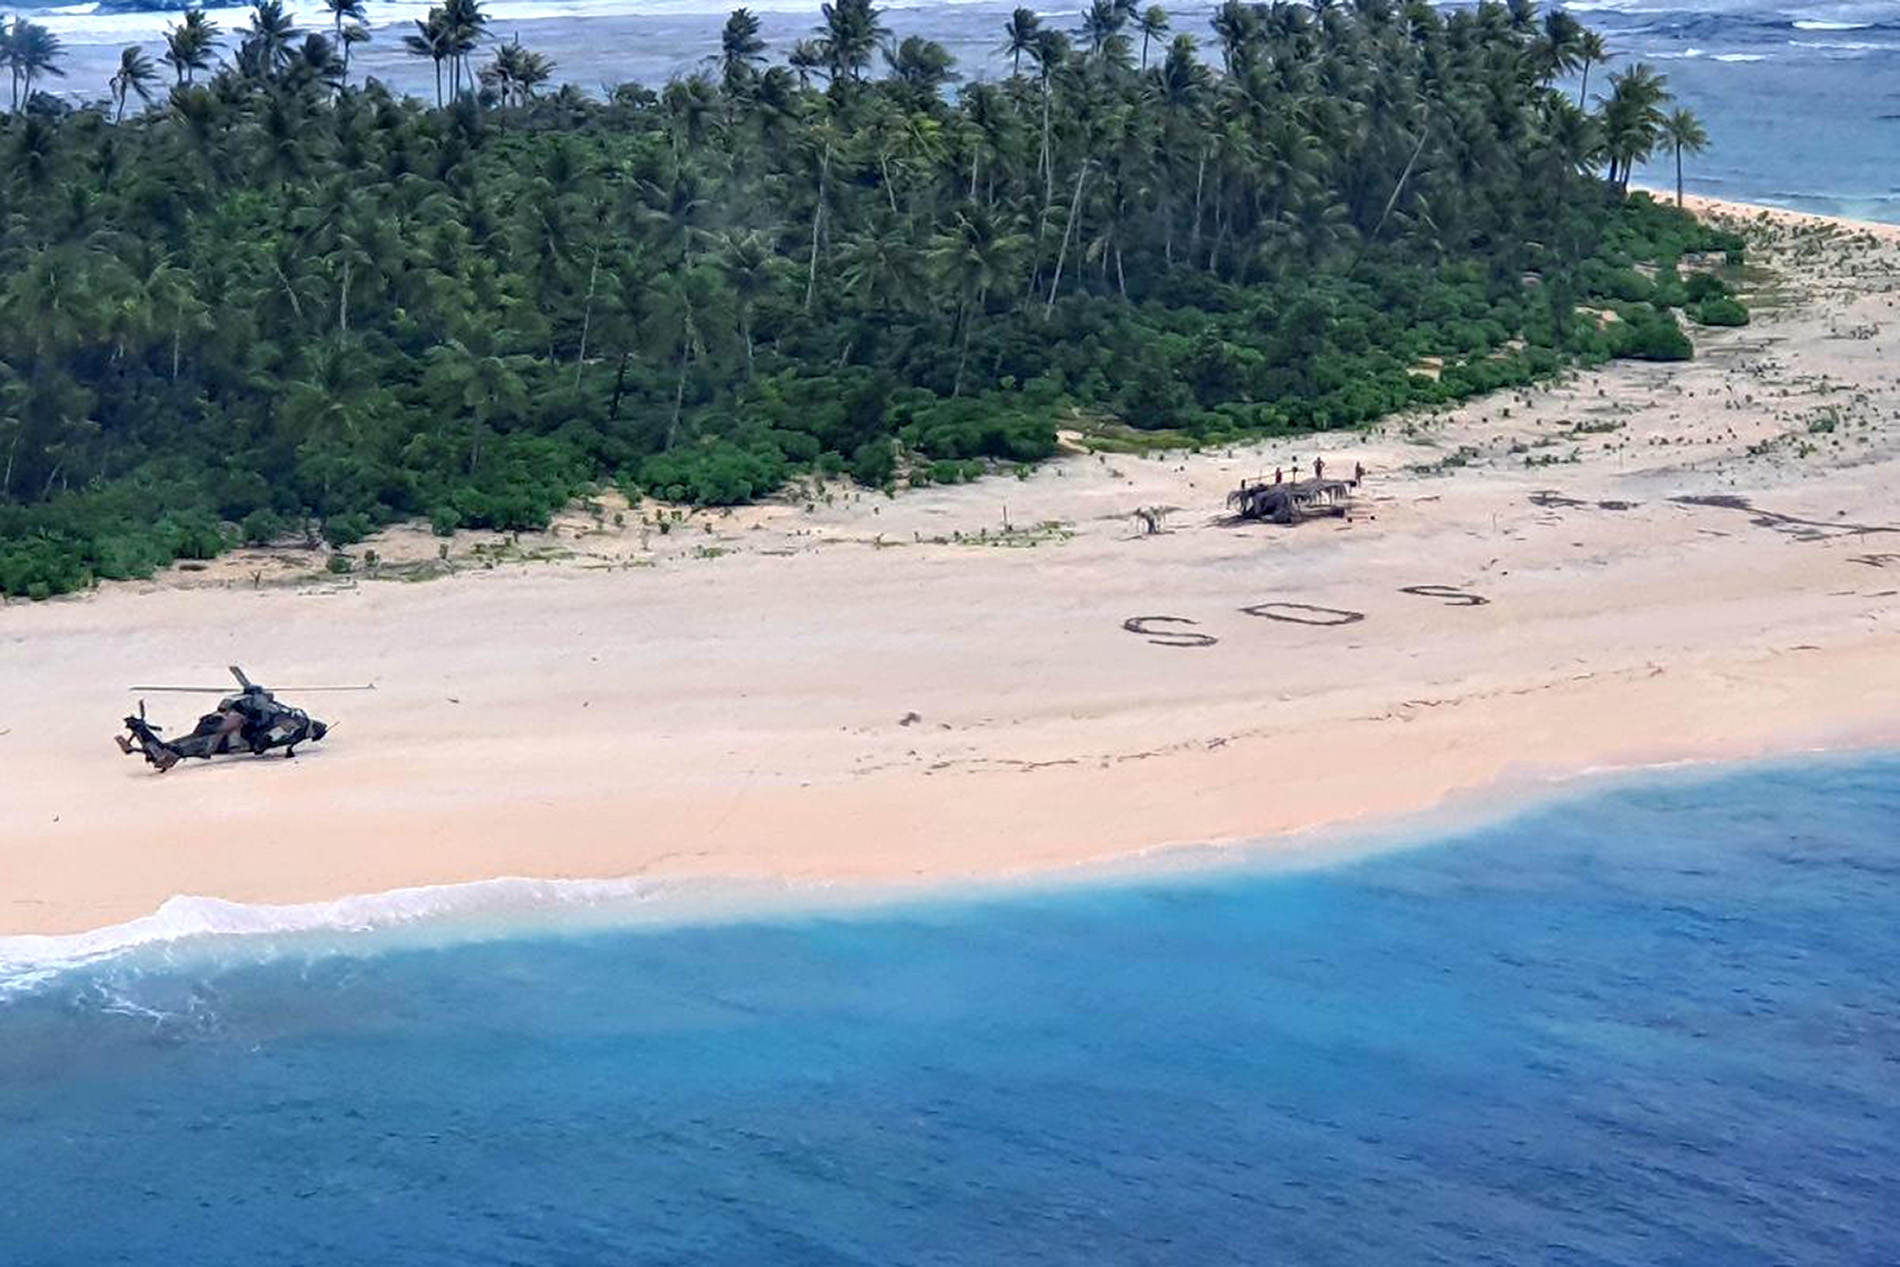 PHOTO: An Australian Army ARH Tiger helicopter lands near the letters "SOS" on a beach on Pikelot Island where three men were found in good condition after being missing for three days, Aug. 2, 2020.